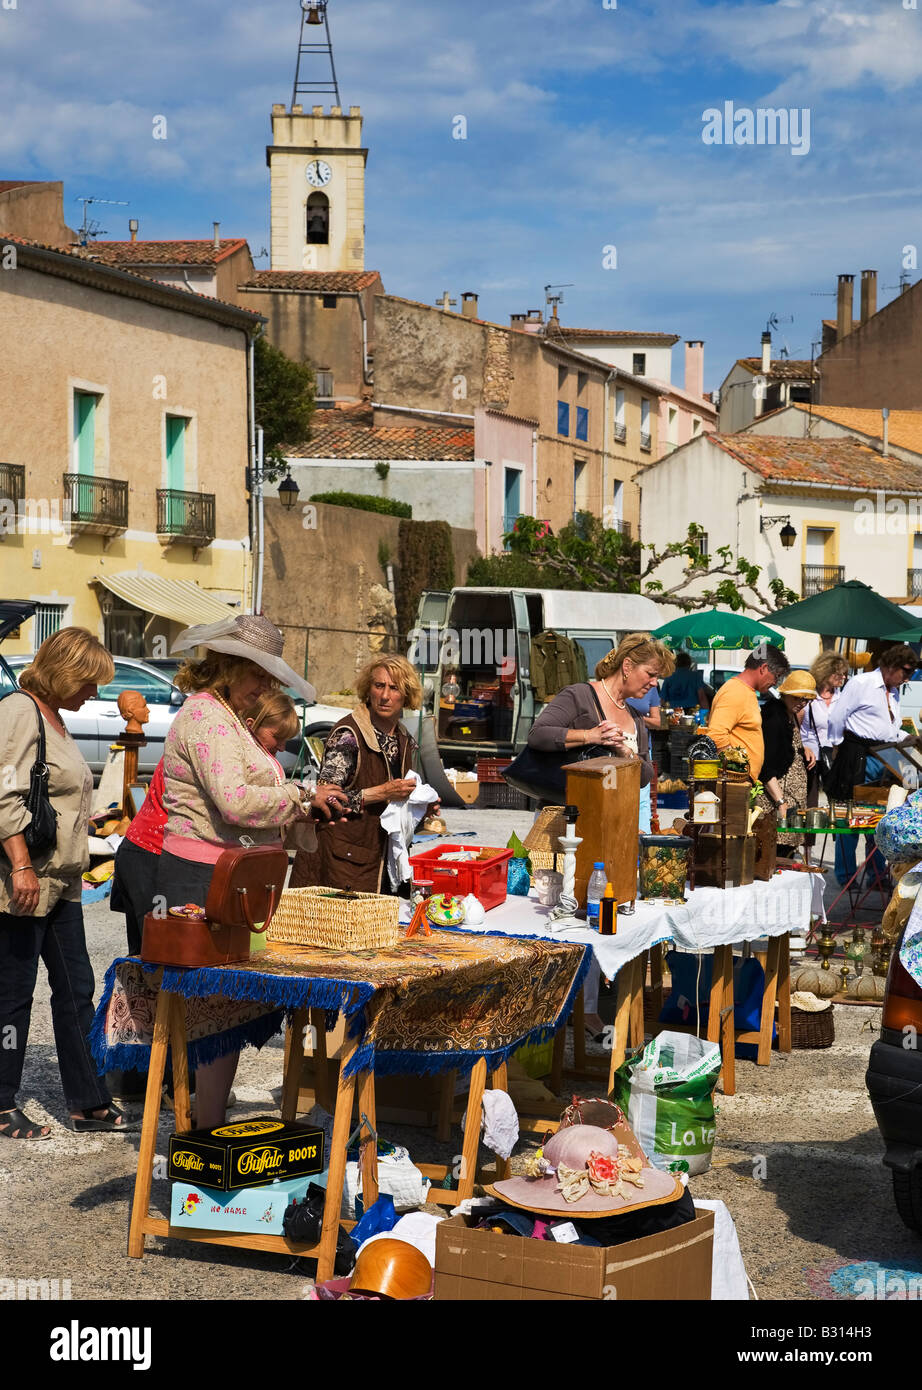 Busy Fleamarket in Bouzigues, Near Meze, Languedoc-Roussillon, France Stock Photo